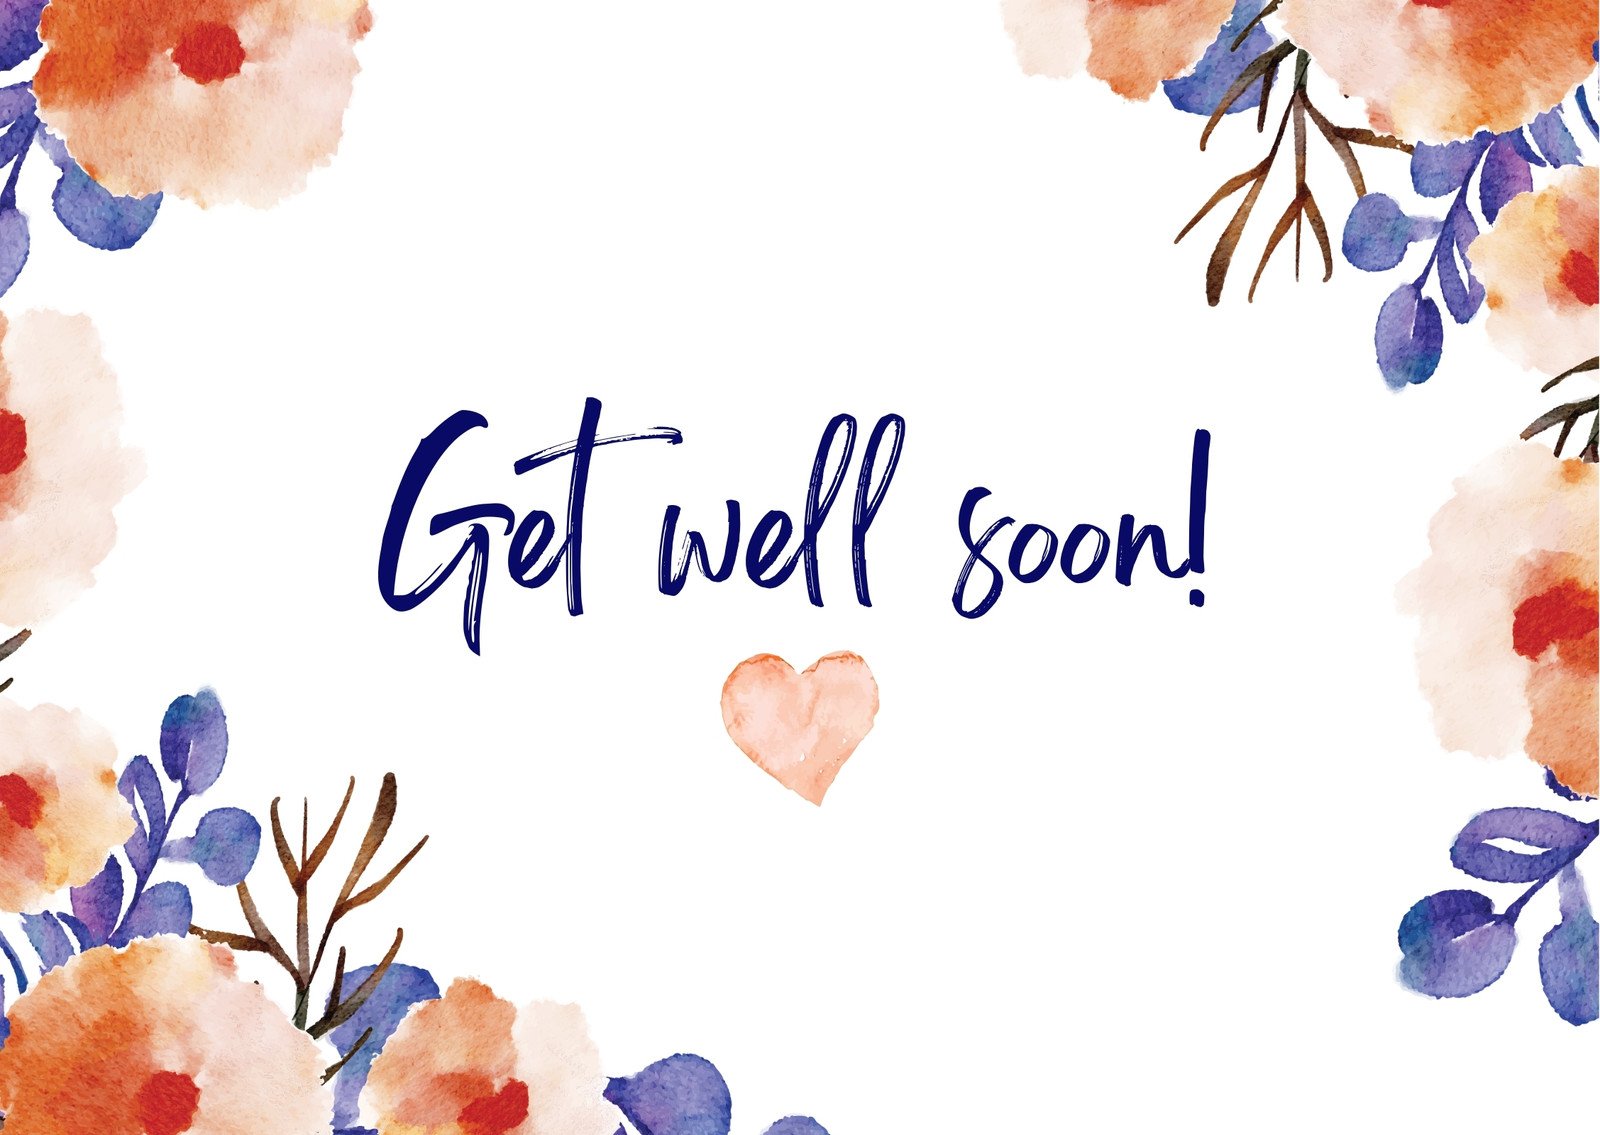 Get Well Soon Card With Teddy Bear Stock Illustration - Download